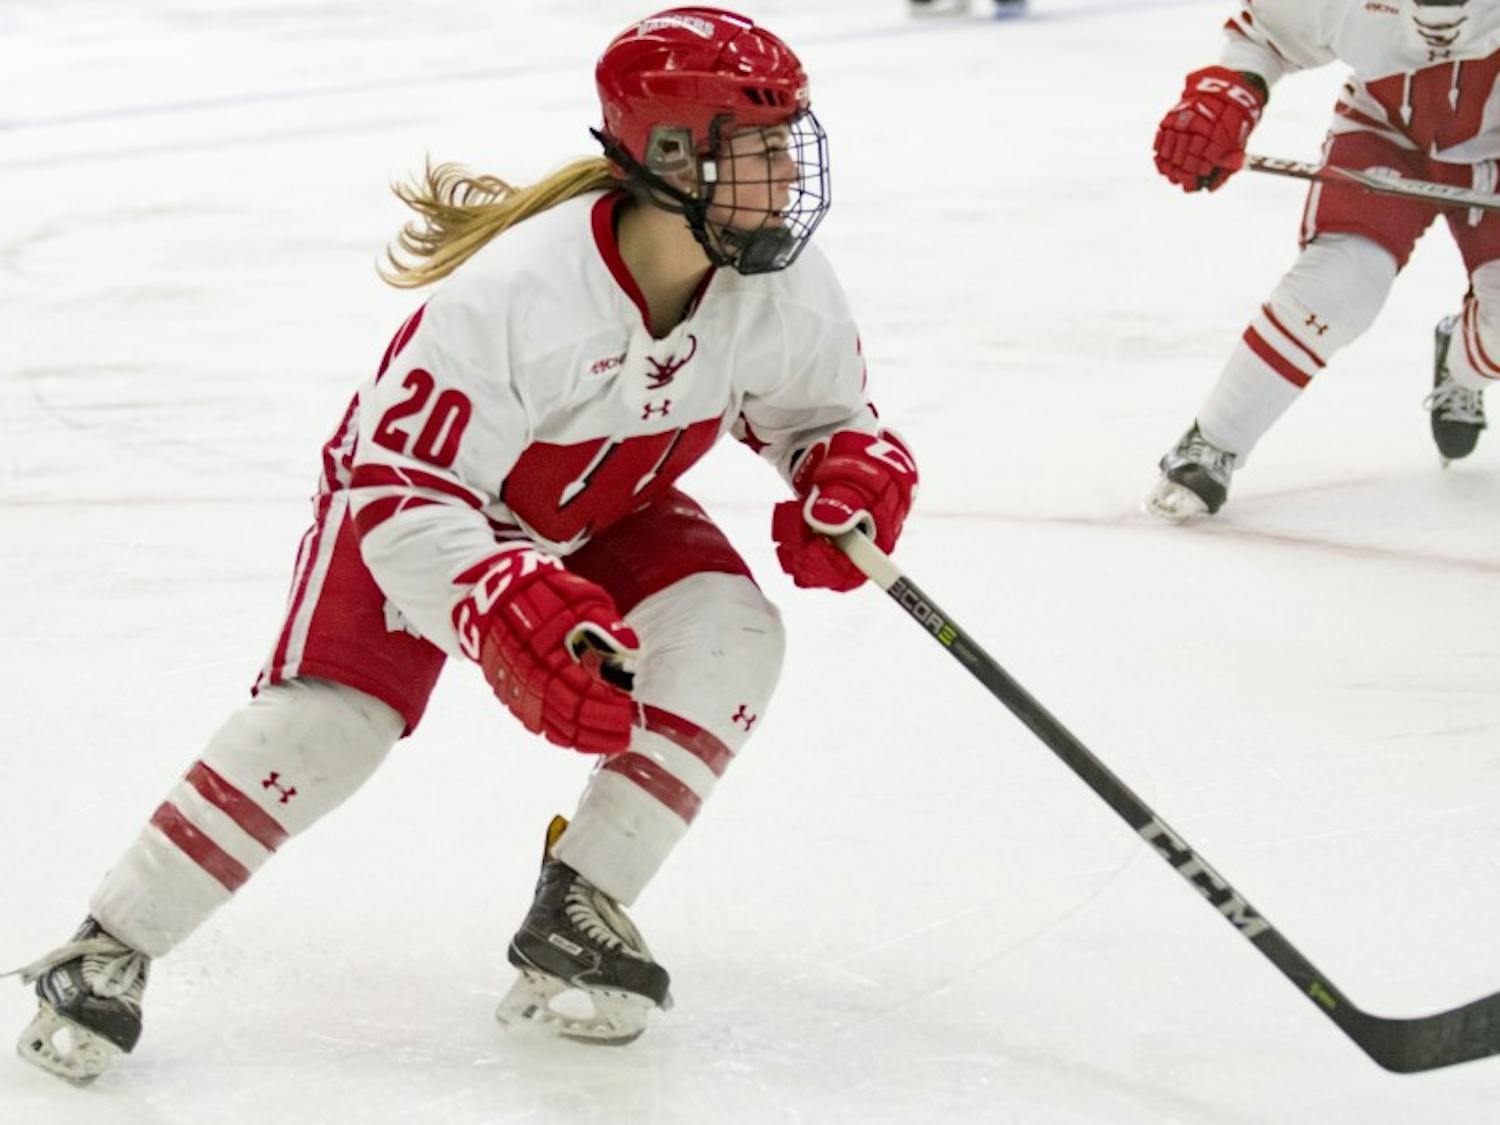 Sophomore Brette Pettet was one of three underclassmen to score for Wisconsin with multiple top seniors unavailable because of international competition.